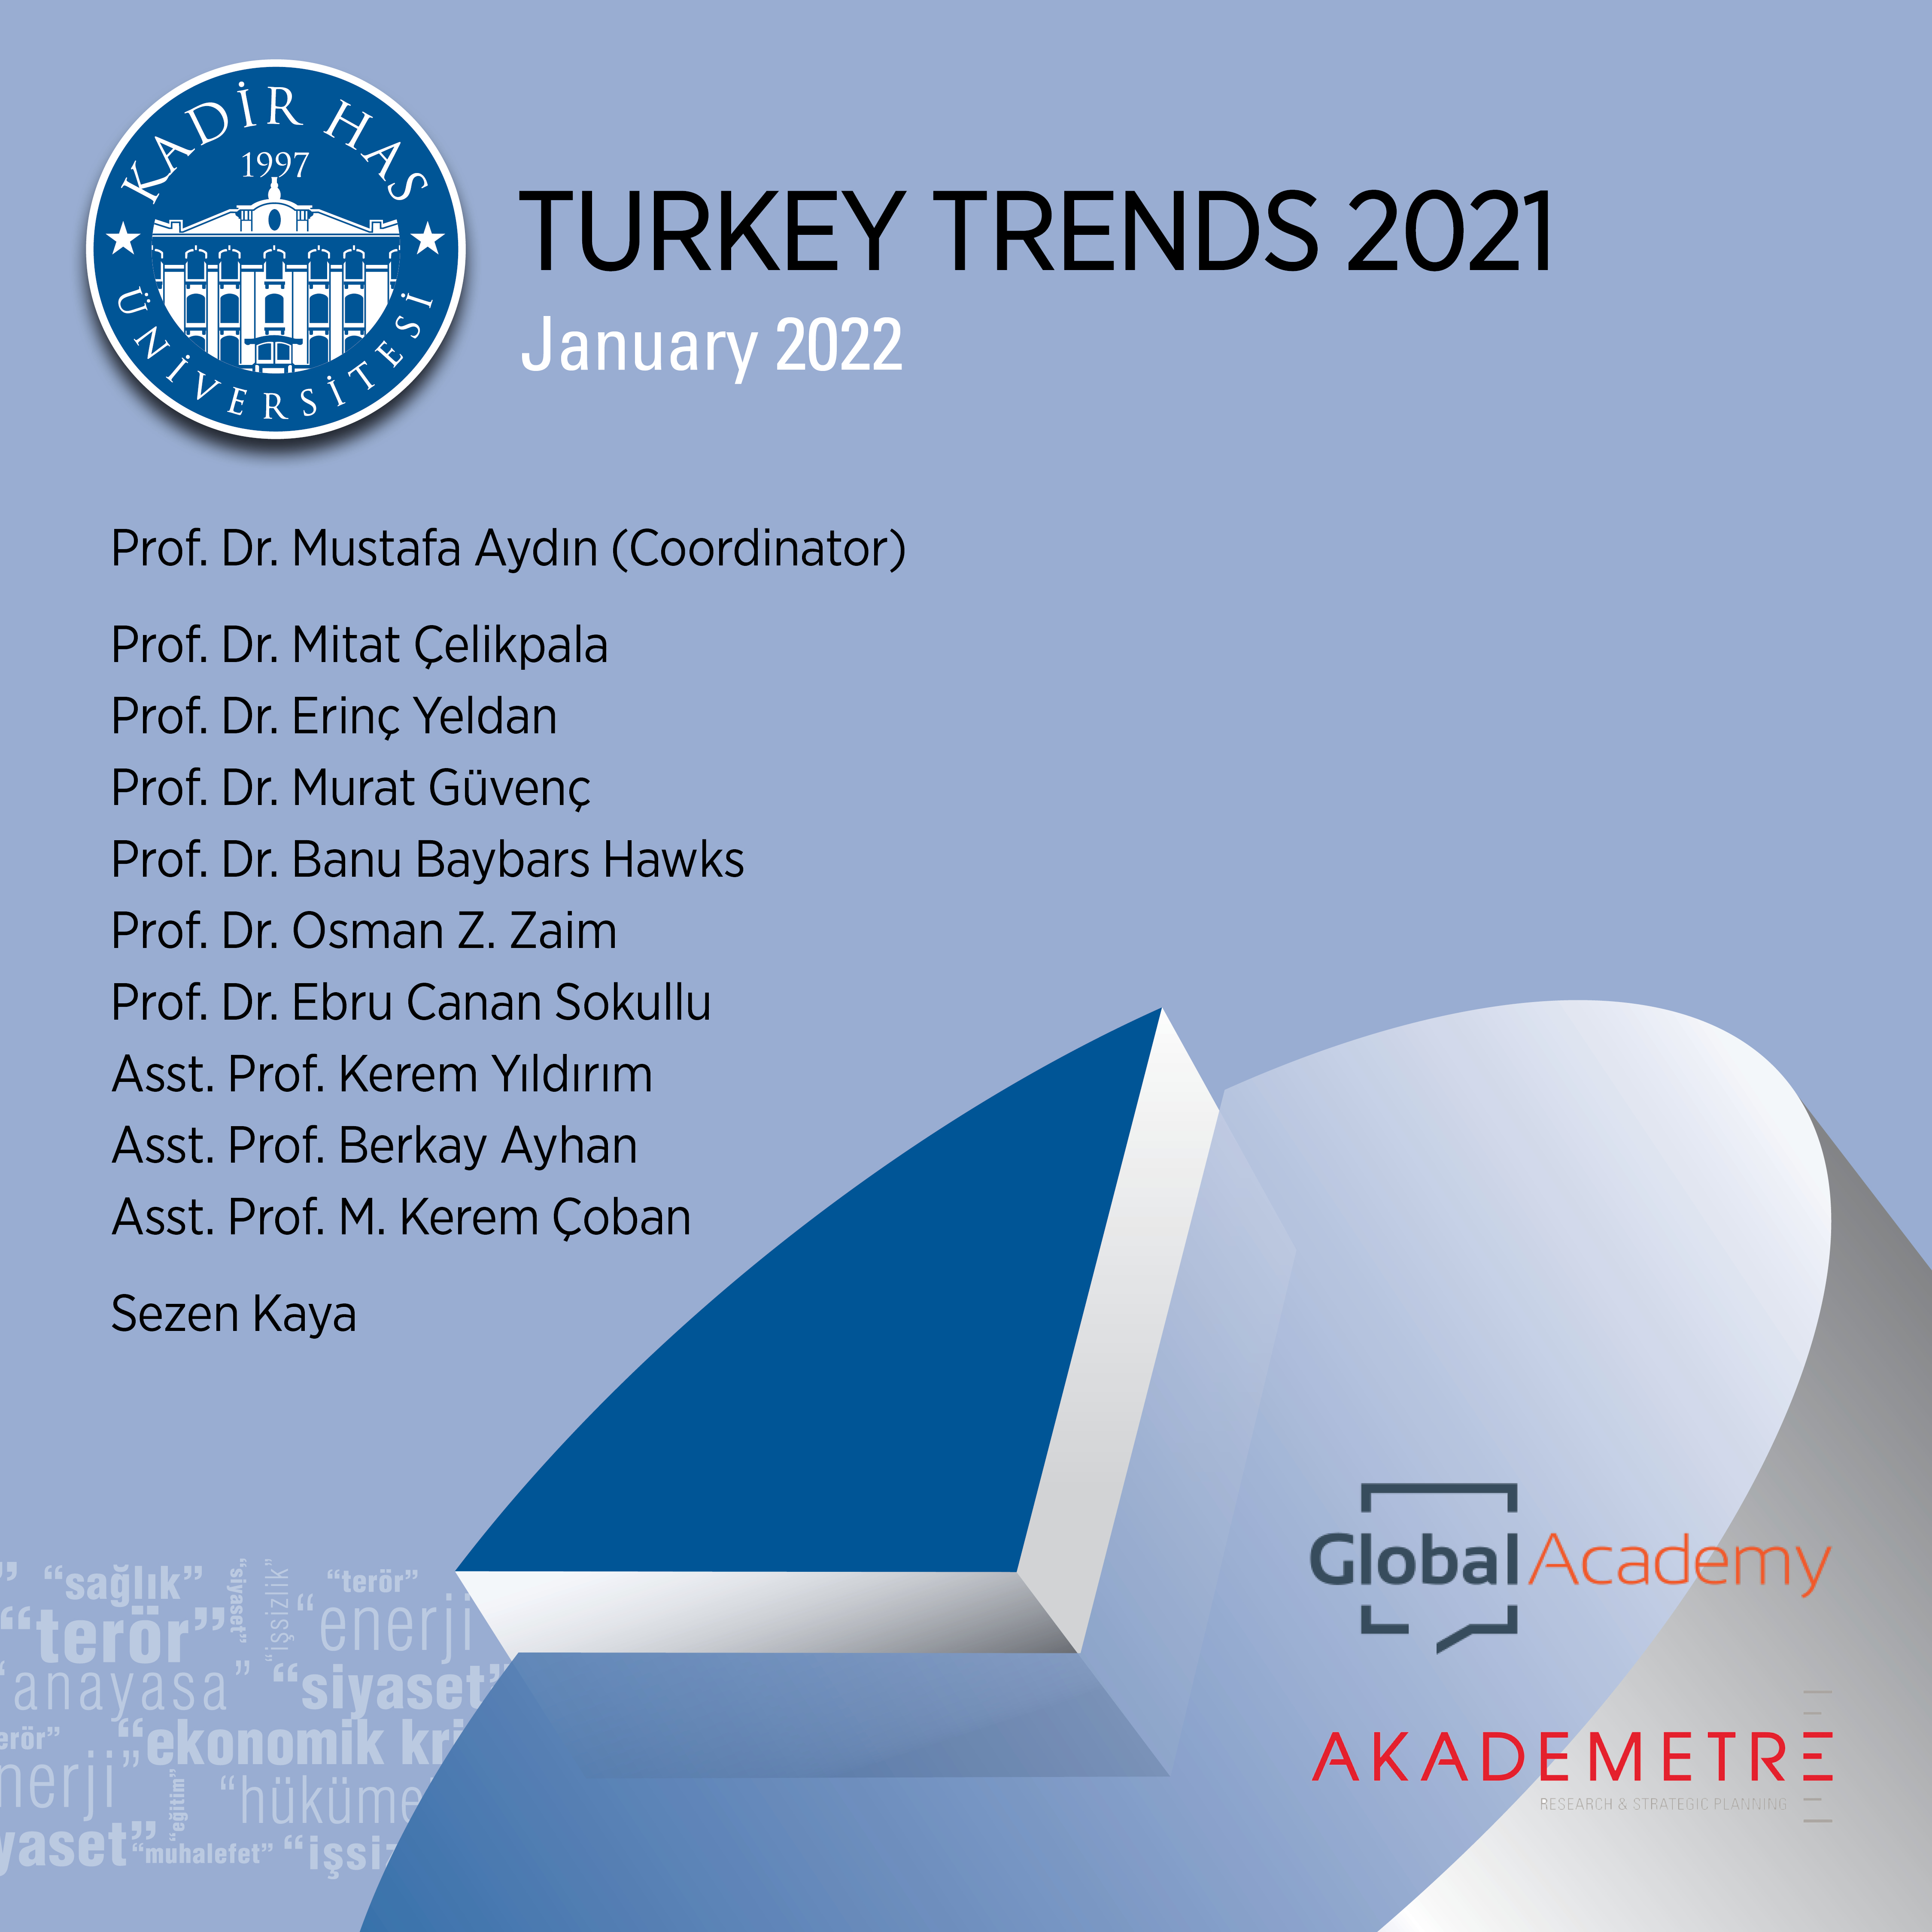 Turkey Trends Survey 2021 Results Announced